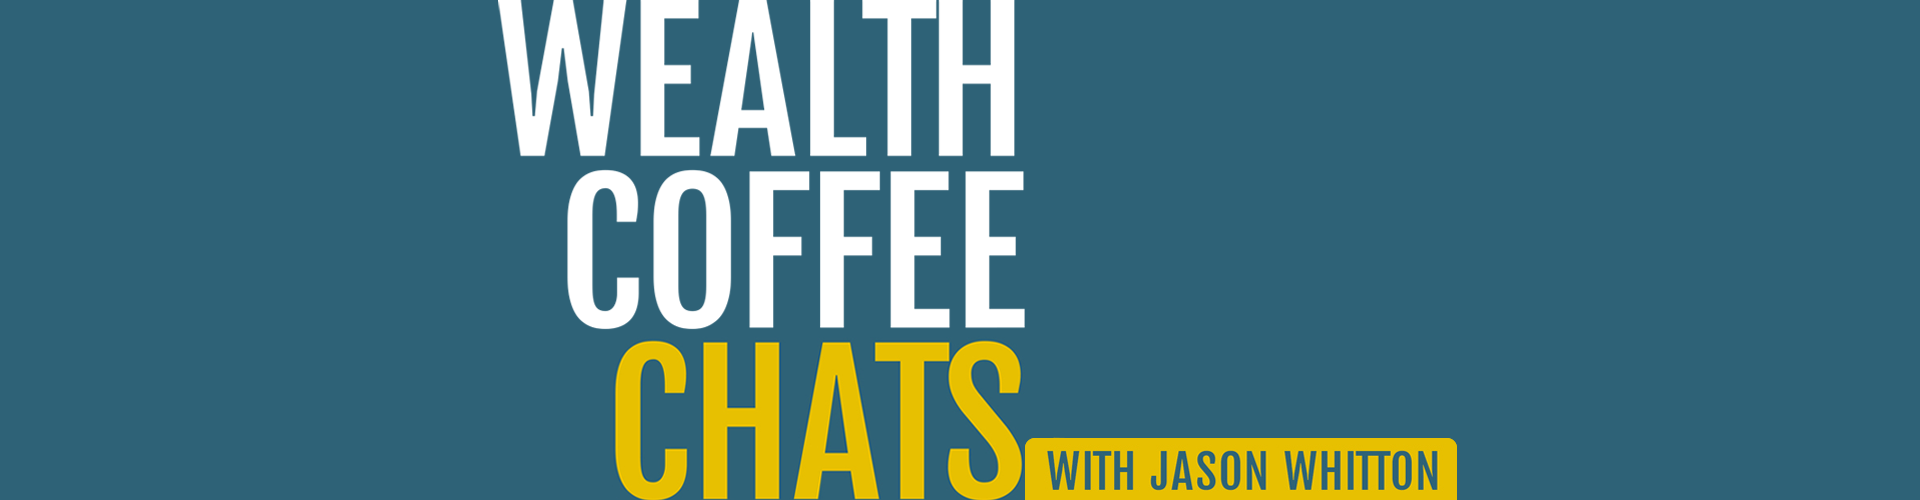 Wealth Coffee Chats